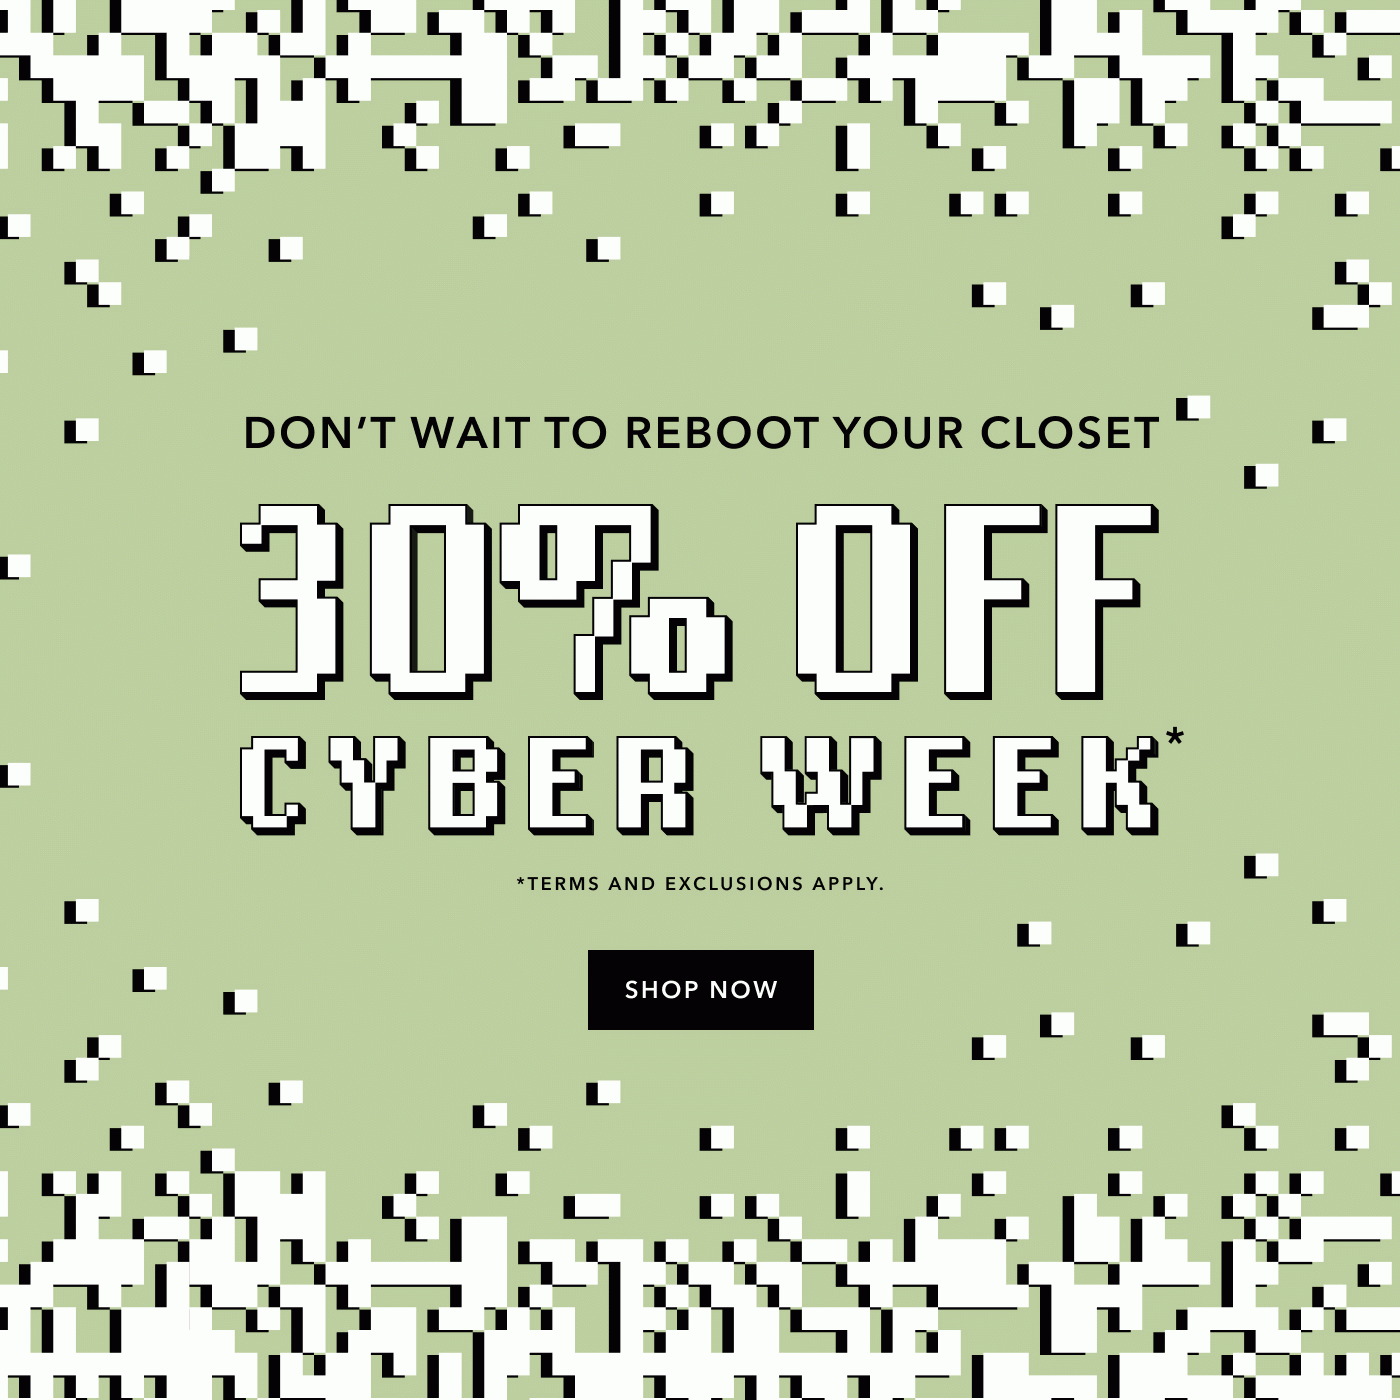 30% off cyber week. Terms and exclusions apply.